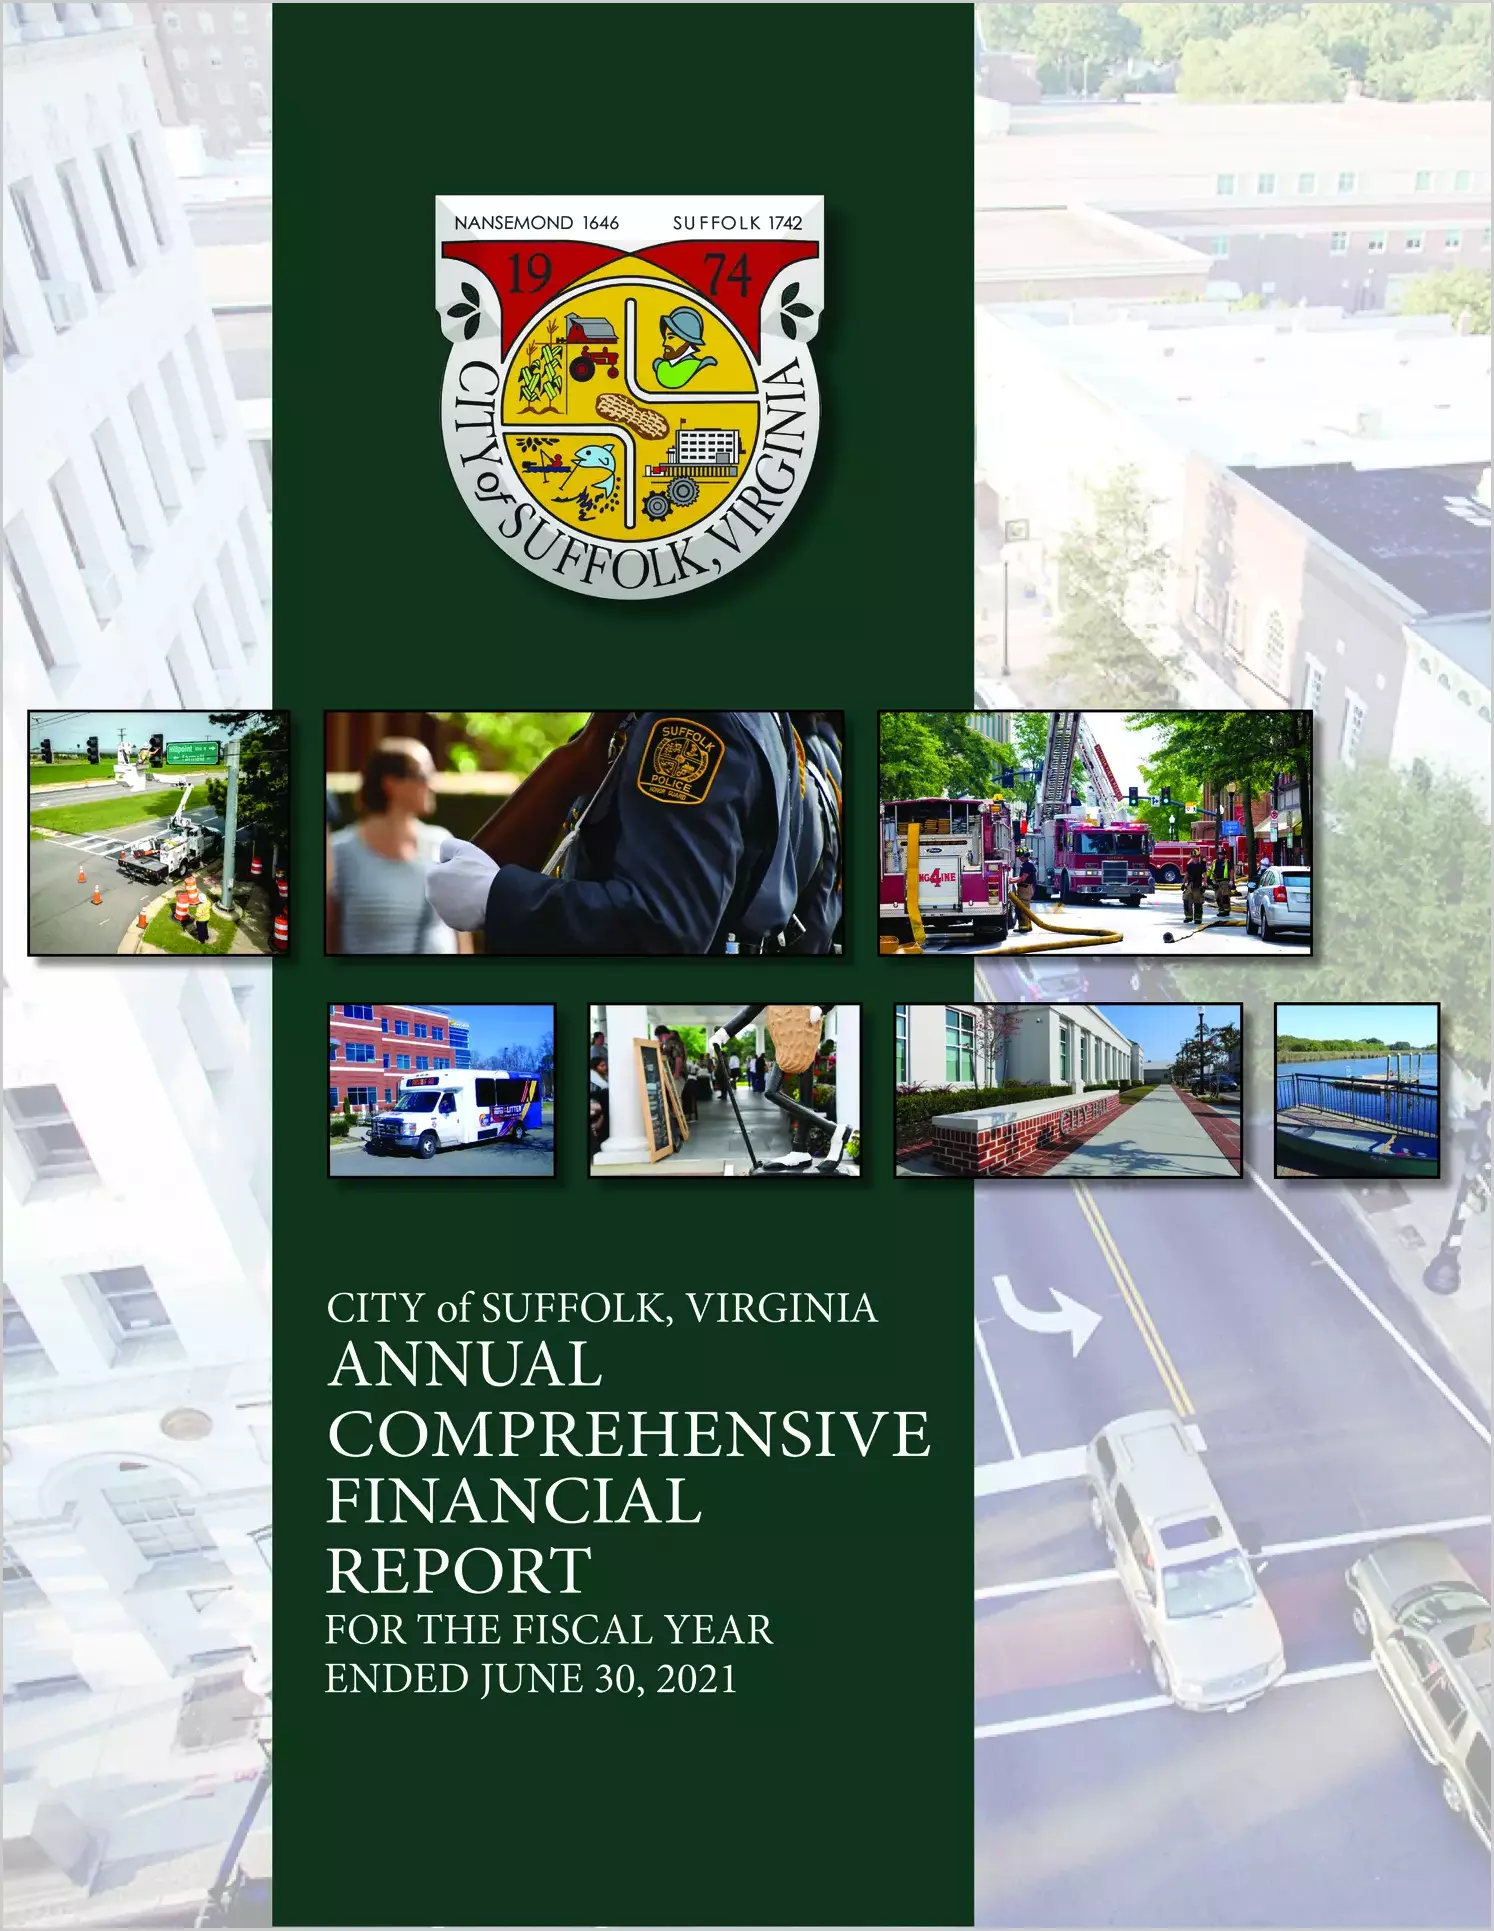 2021 Annual Financial Report for City of Suffolk